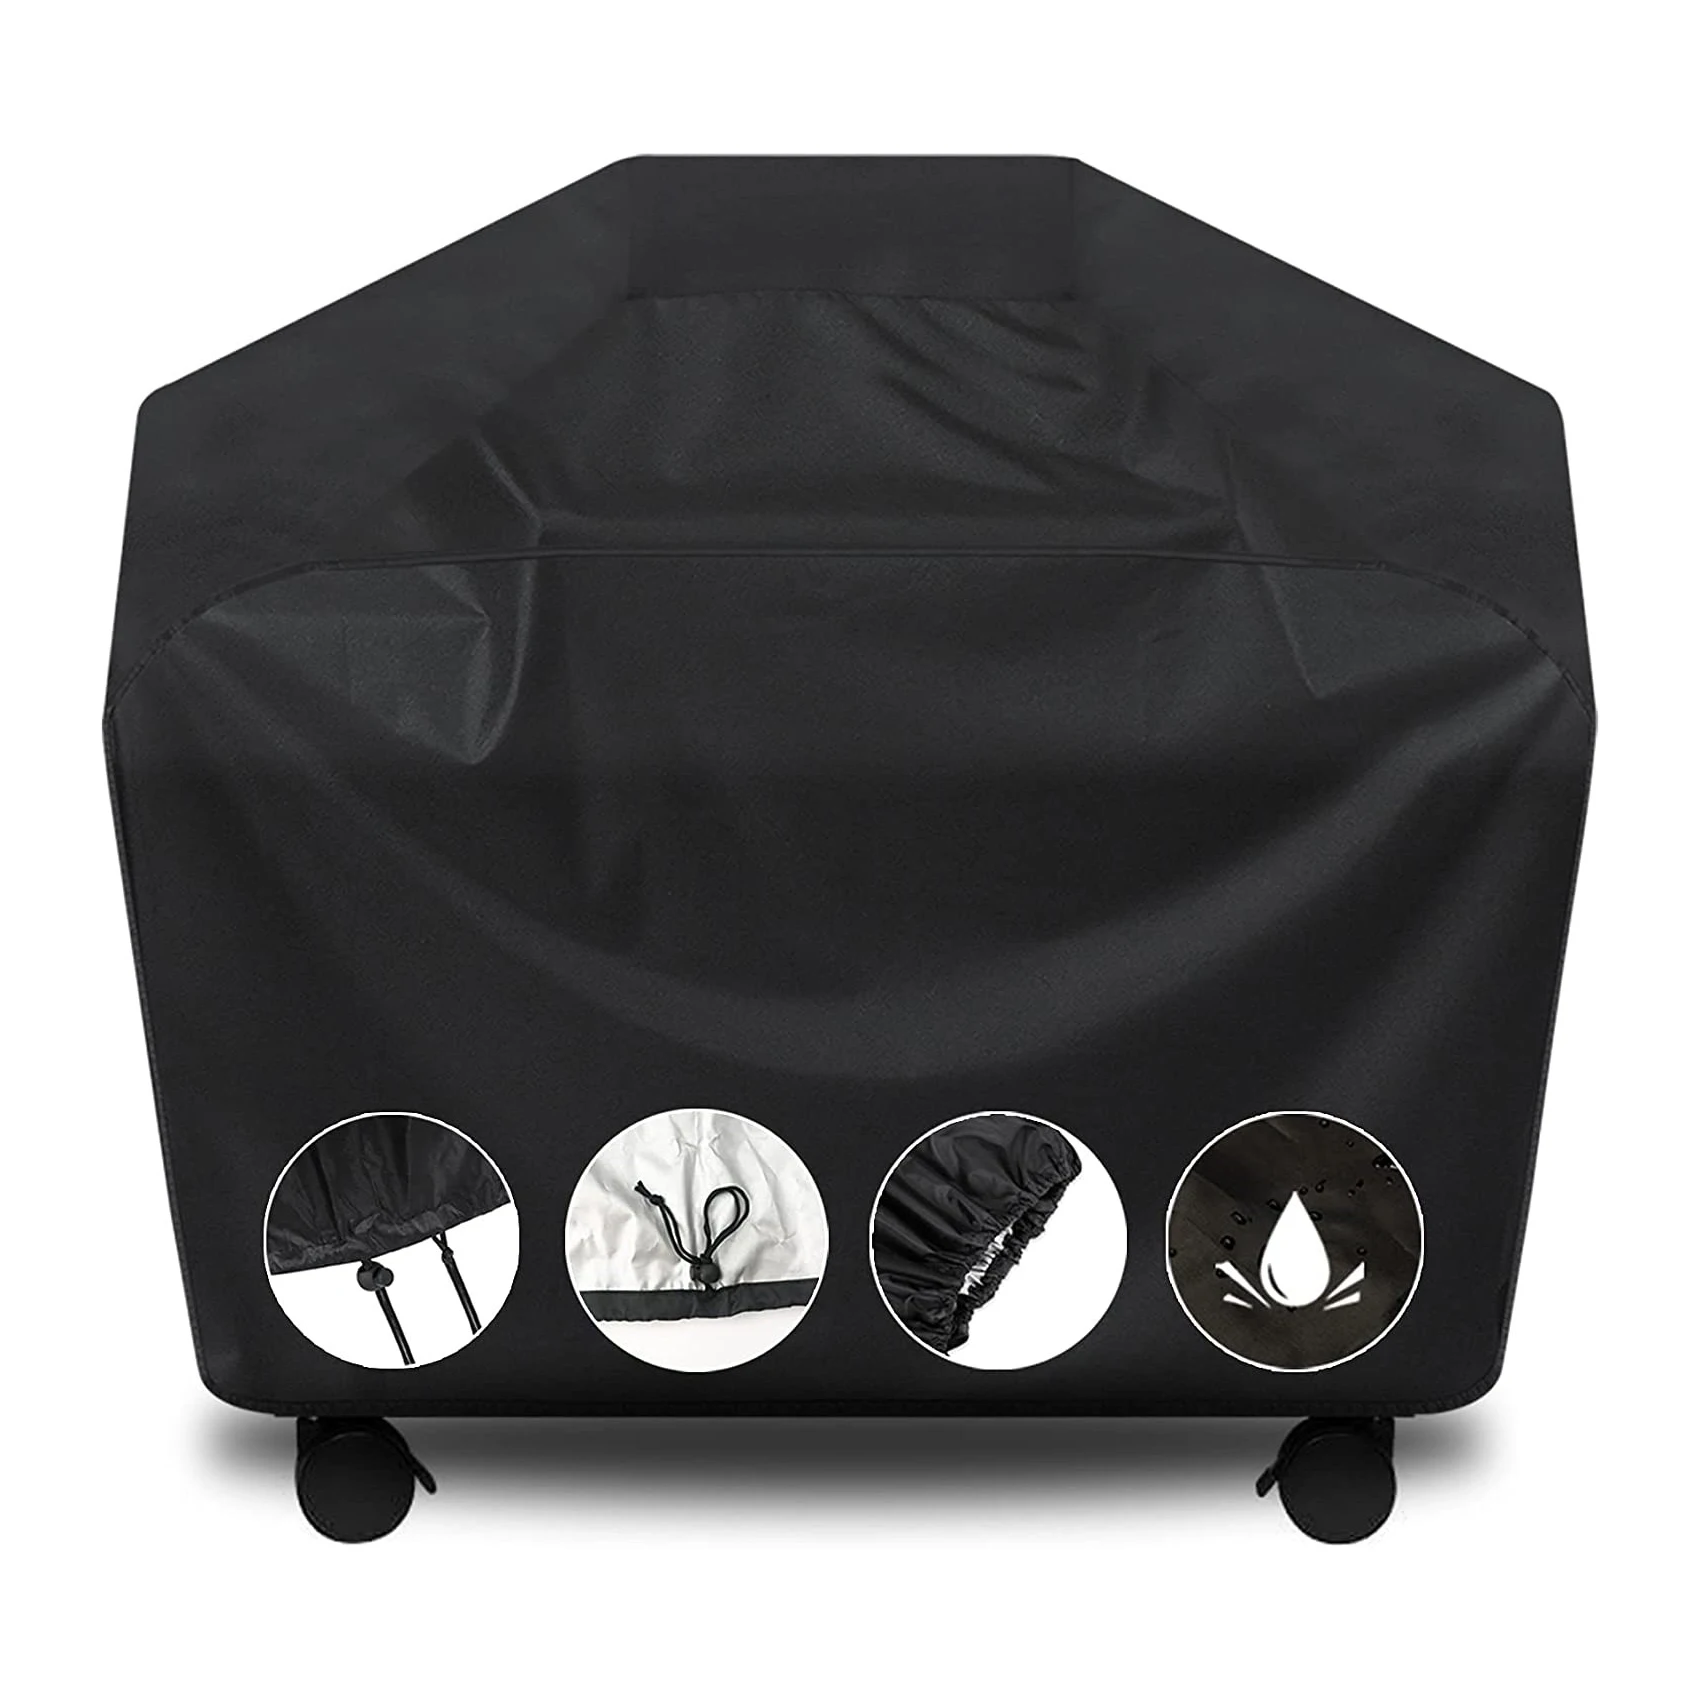 

2022 Amazon Colorful 600D Oxford Waterproof BBQ Cover Patio Furniture Heavy Duty Gas Grill Cover, Black